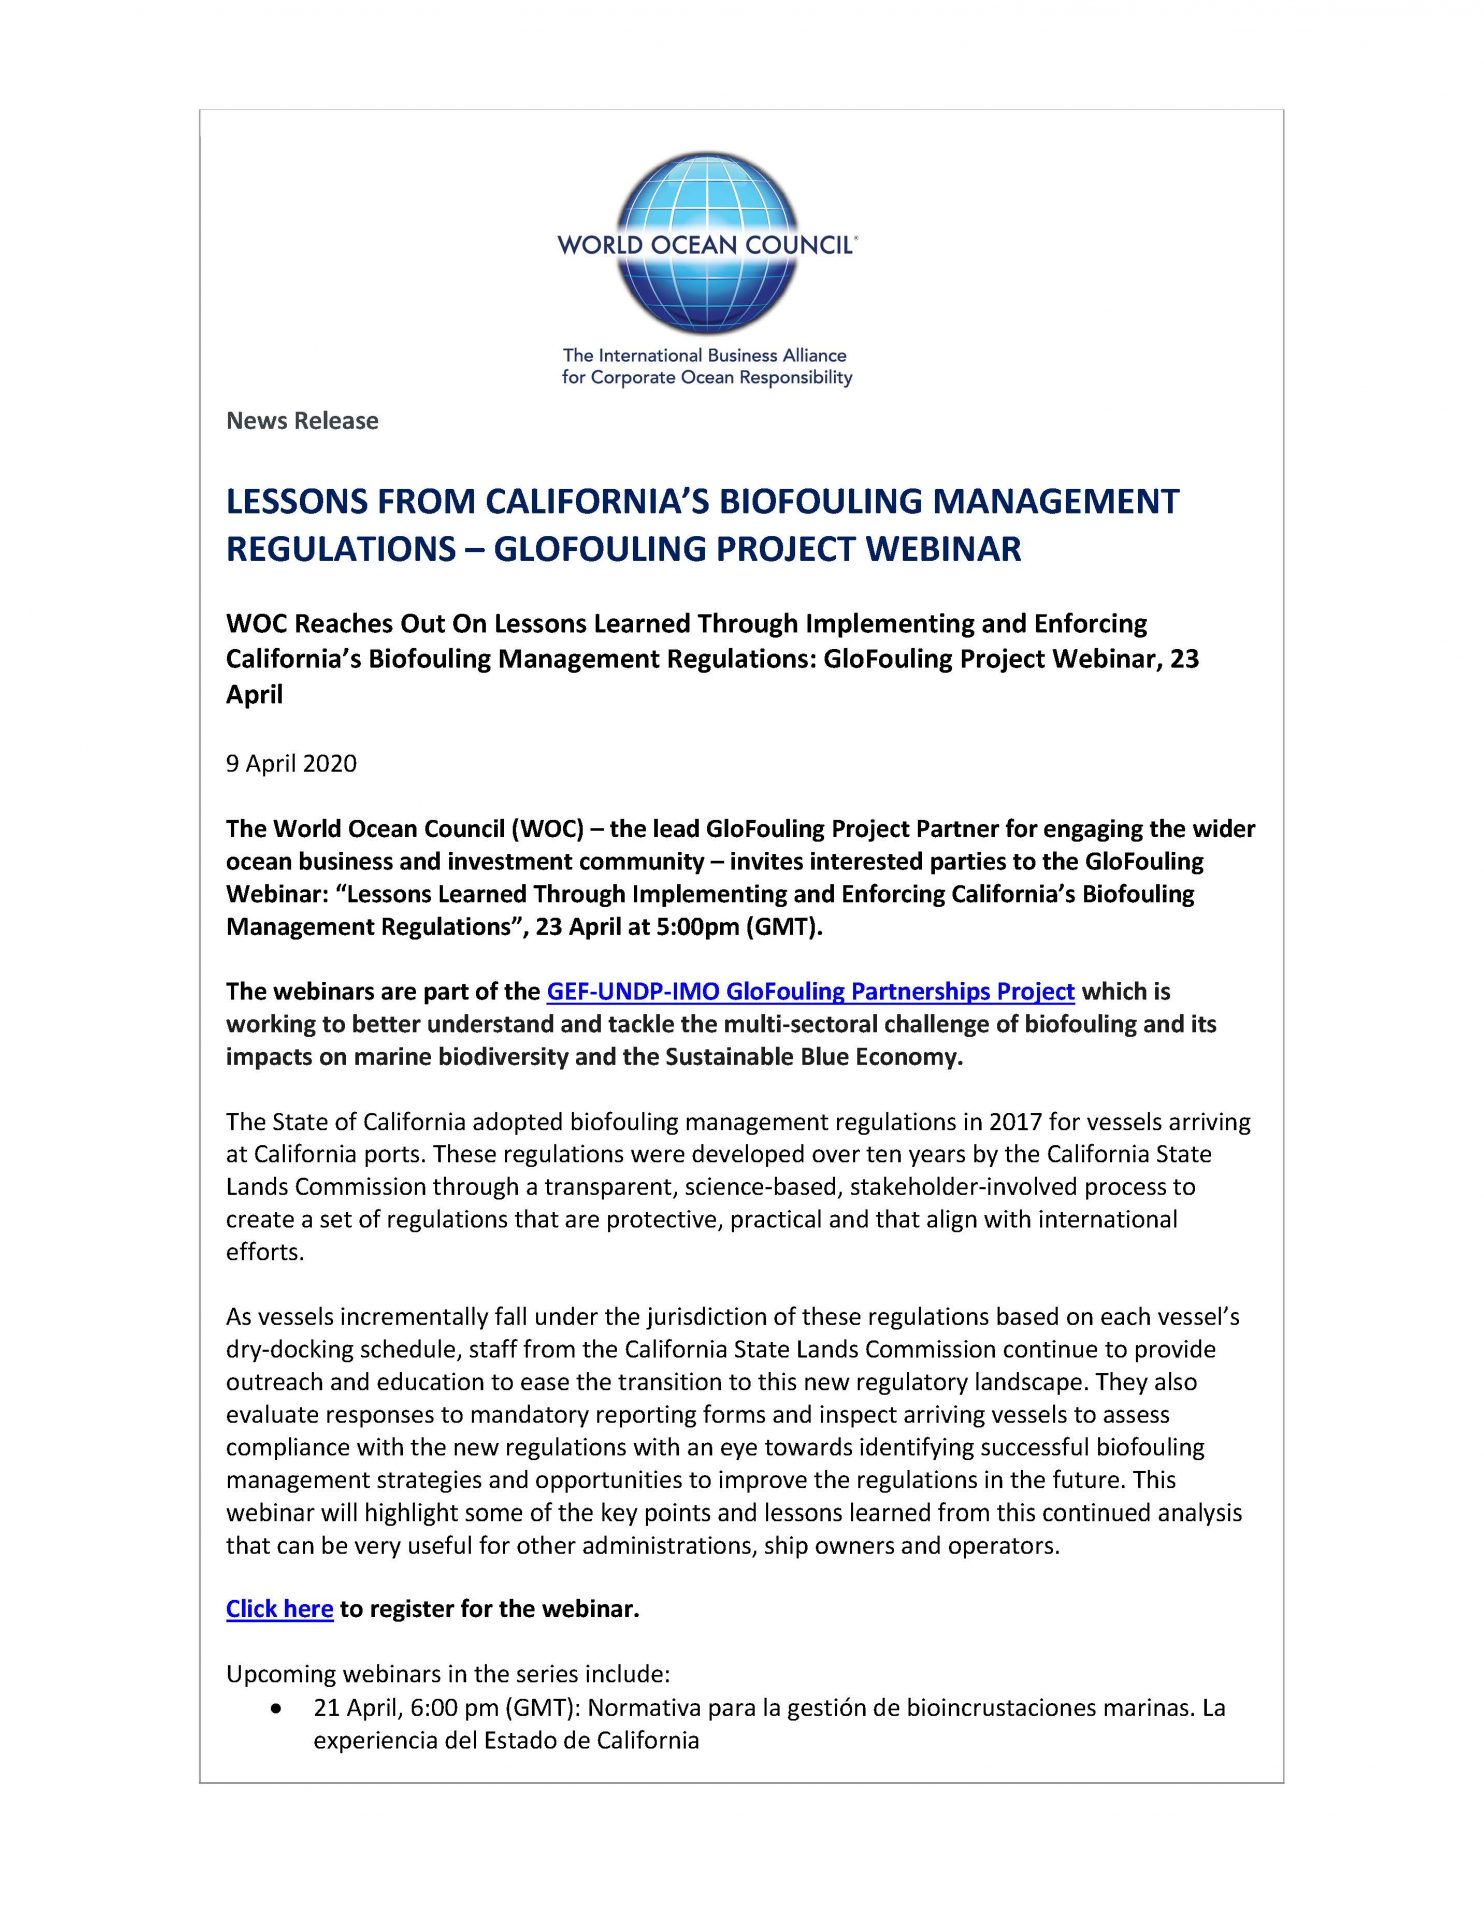 Lessons from California's Biofouling Management Regulations - GloFouling Project Webinar - 9 April 2020